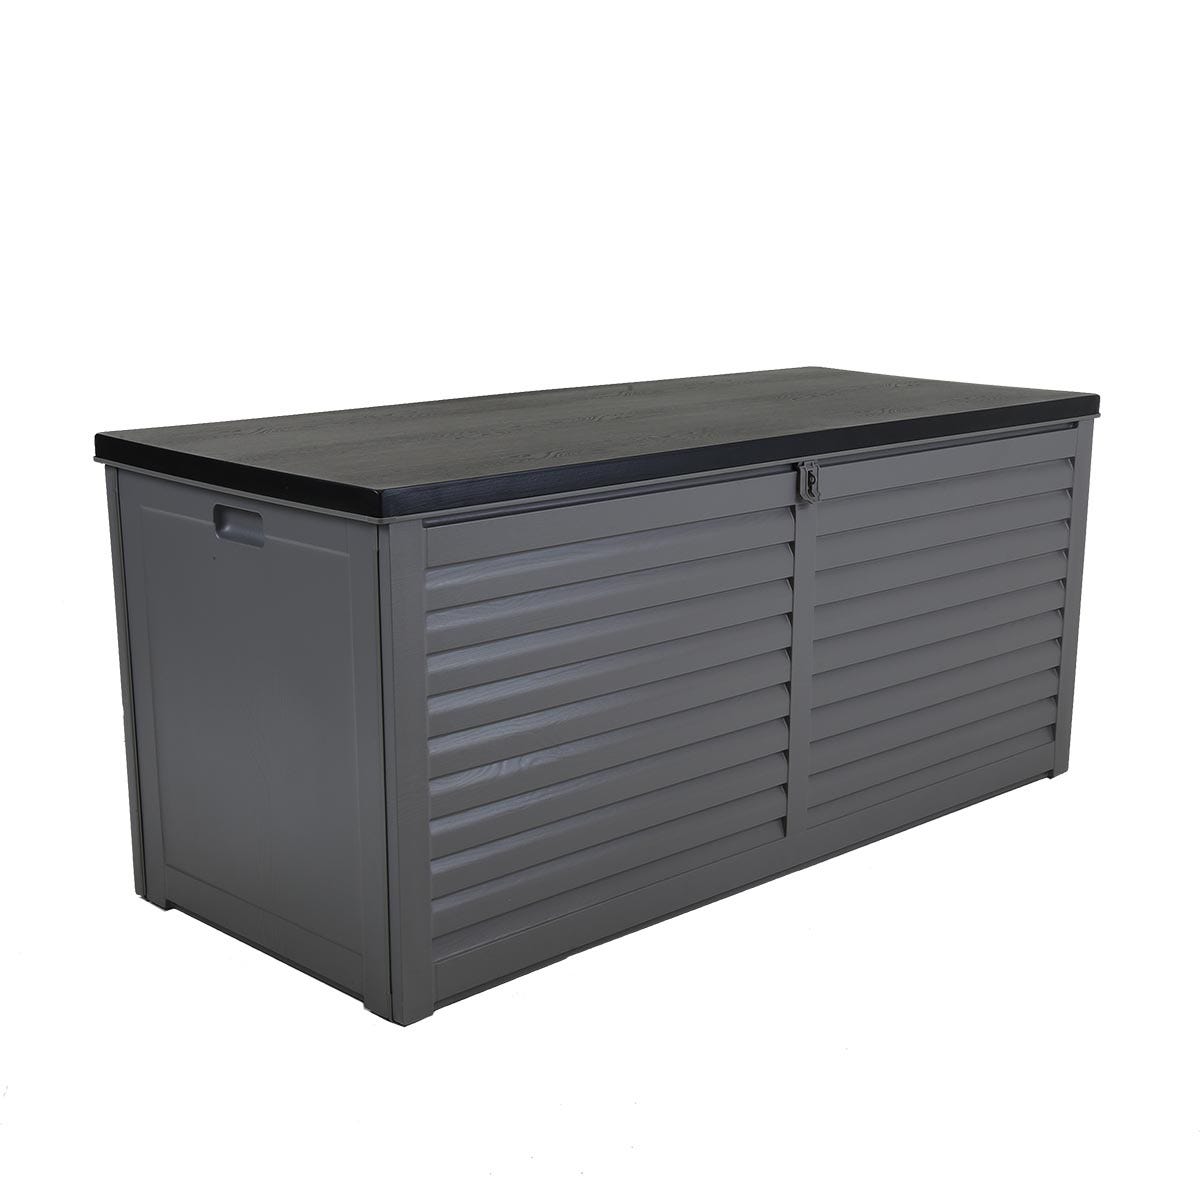 Charles Bentley 490l Large Outdoor Plastic Storage Box Grey And Black